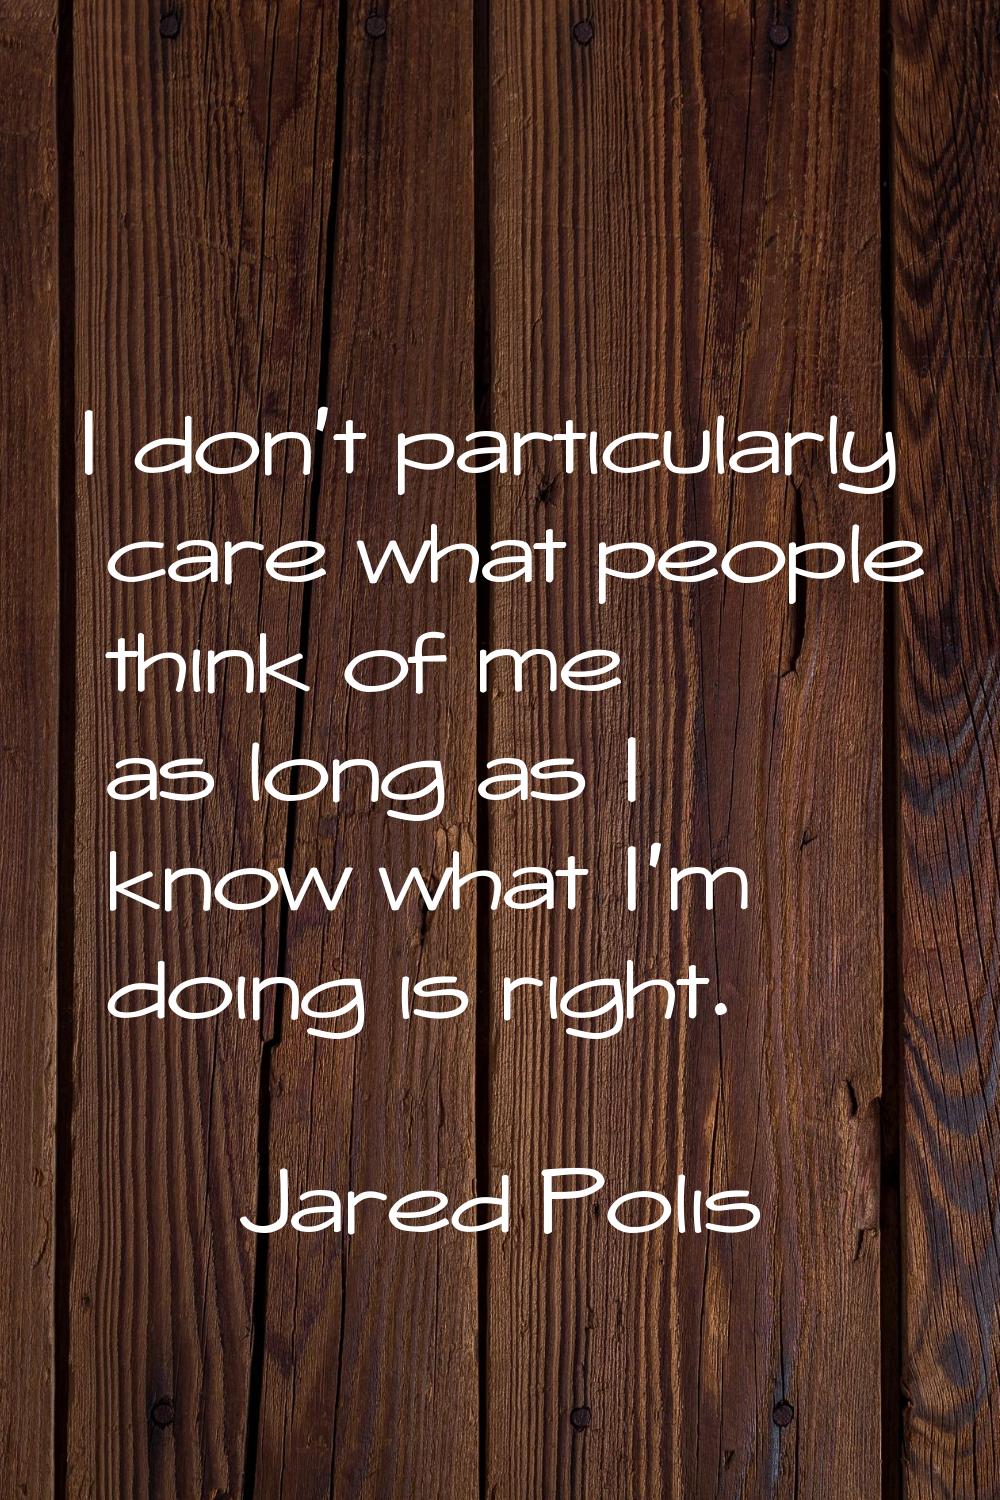 I don't particularly care what people think of me as long as I know what I'm doing is right.